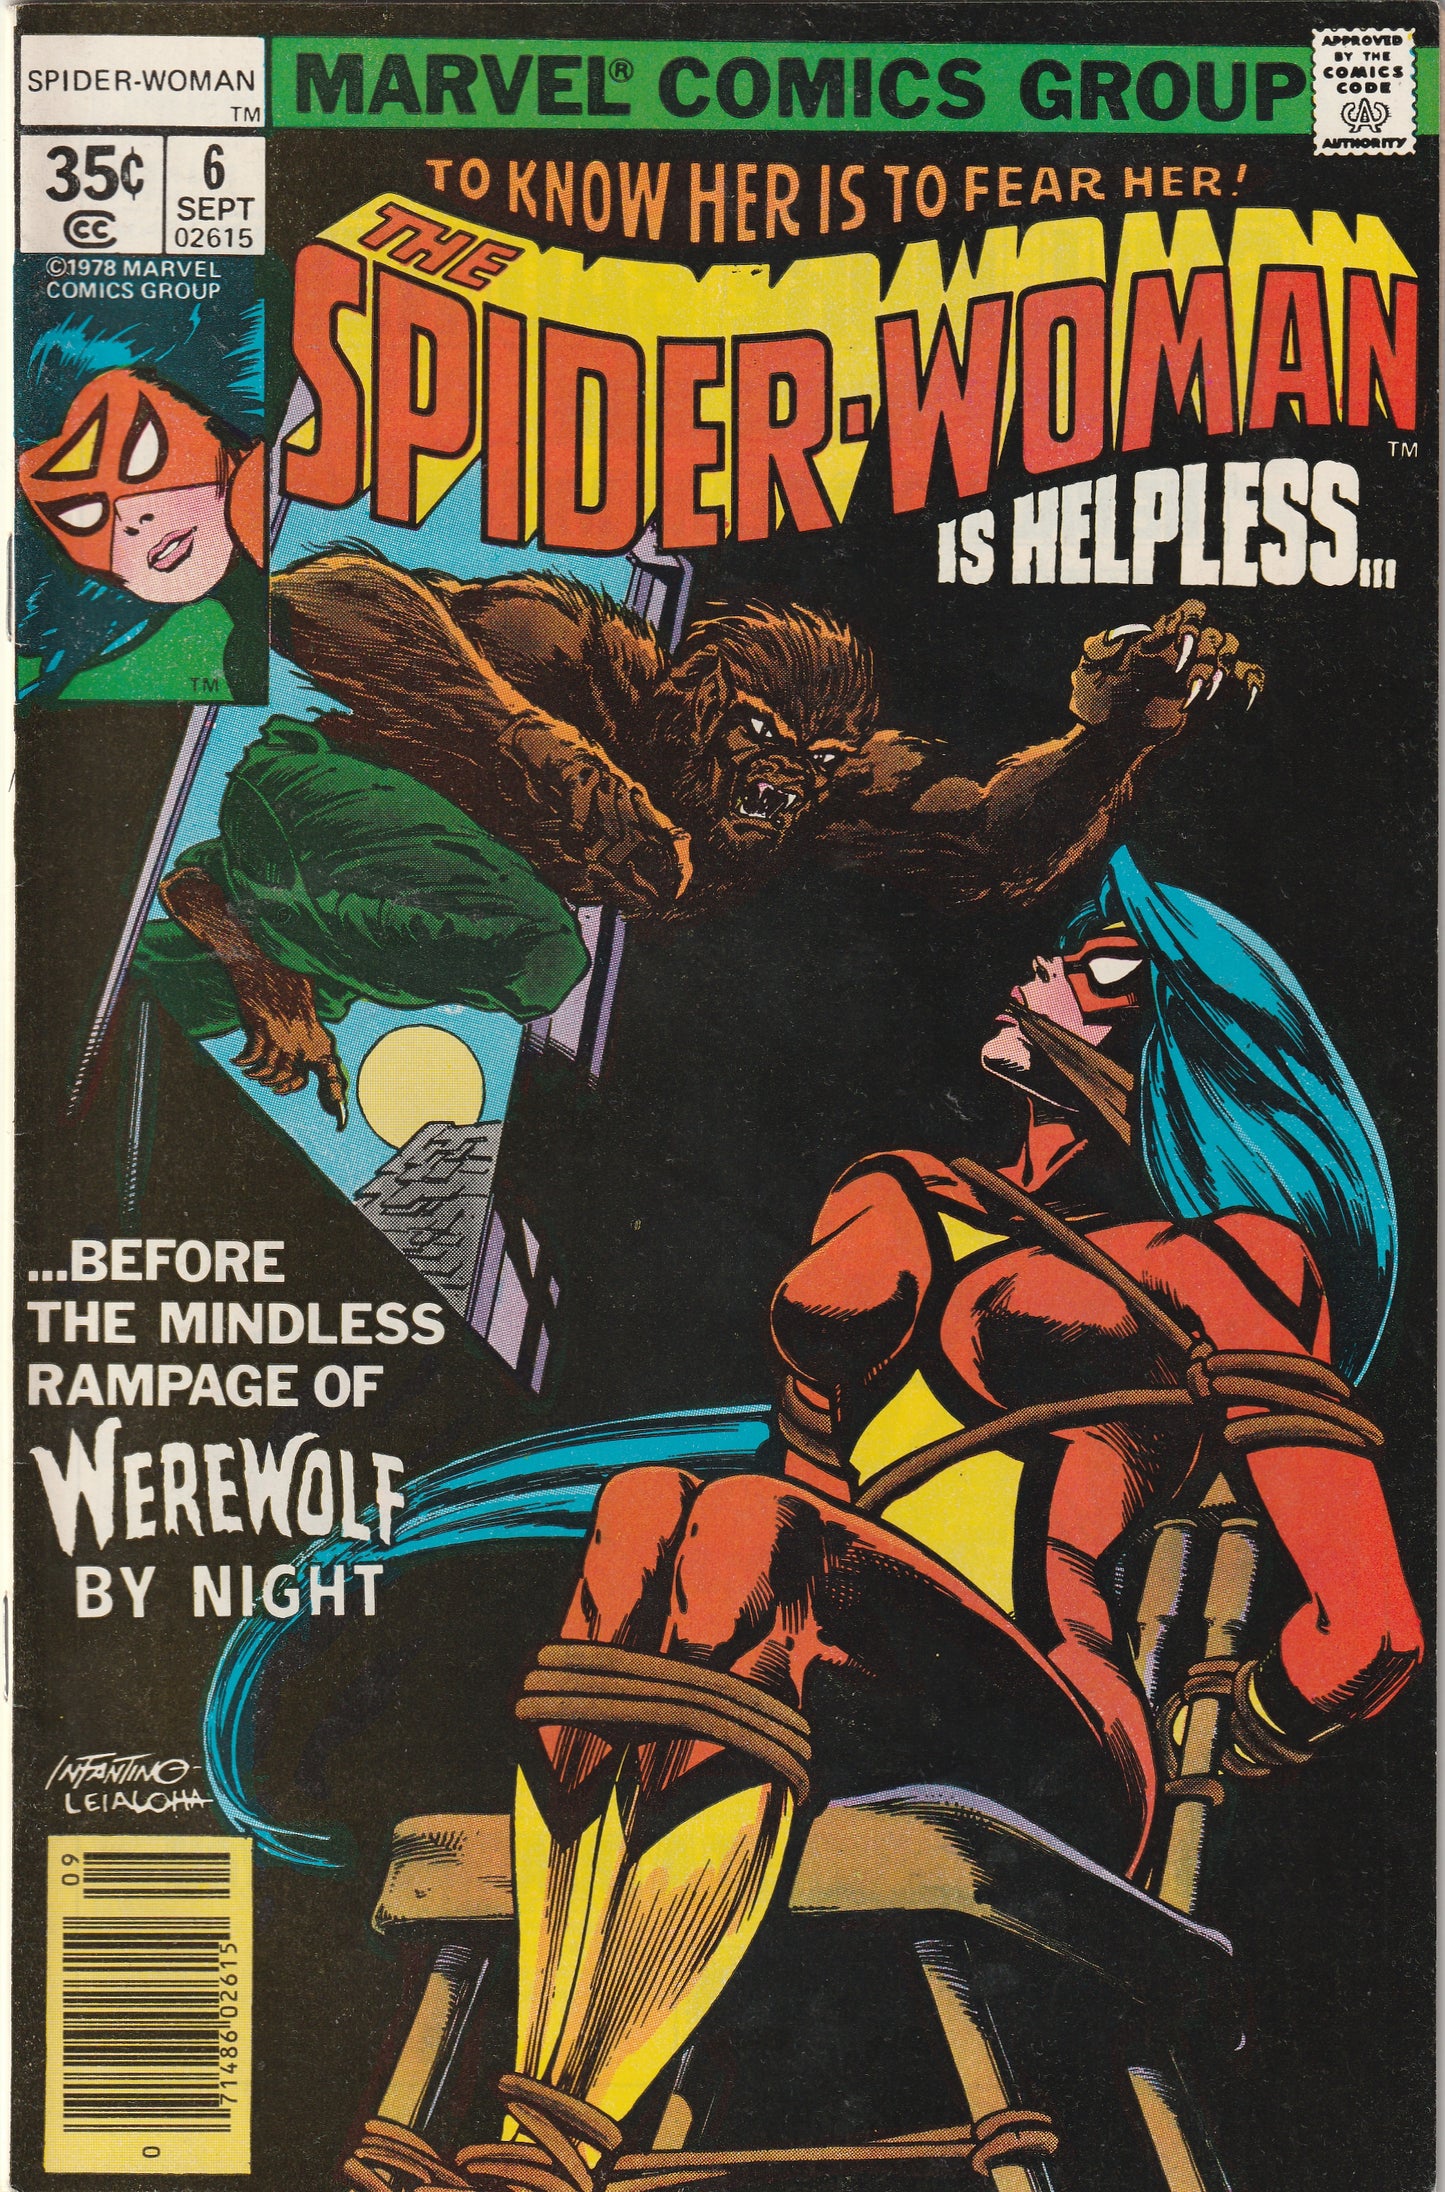 Spider-Woman #6 (1978) - Werewolf by Night Appearance - Bondage Cover